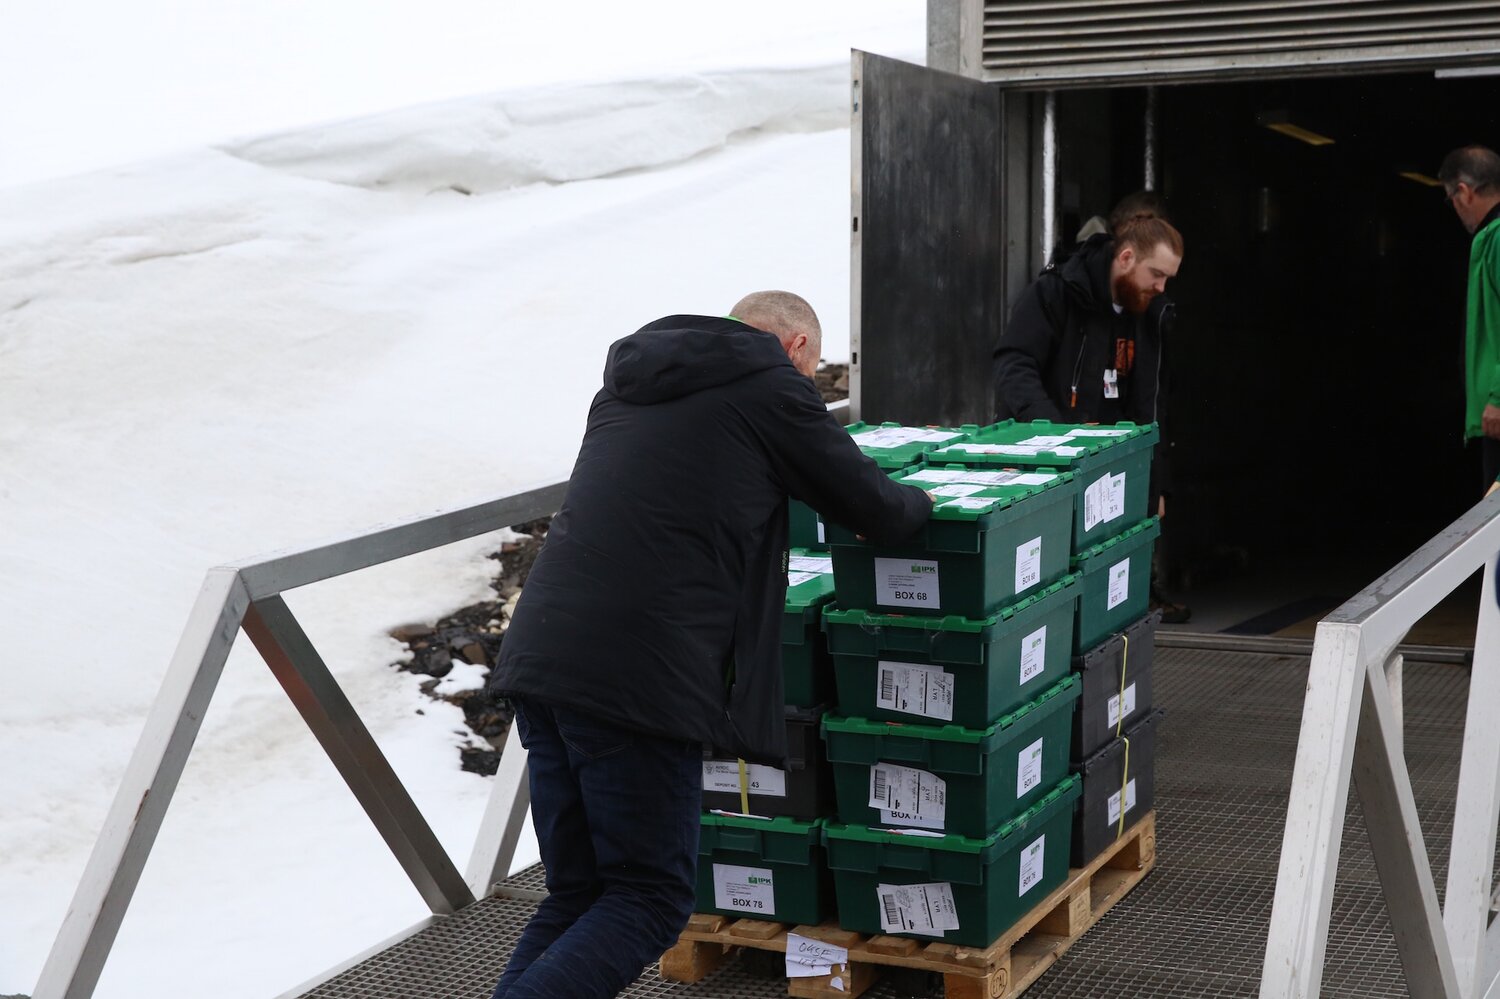 Åsmund Asdal, from the Nordic Genetic Resource Center (NordGen) brings seeds into the Svalbard Global Seed Vault